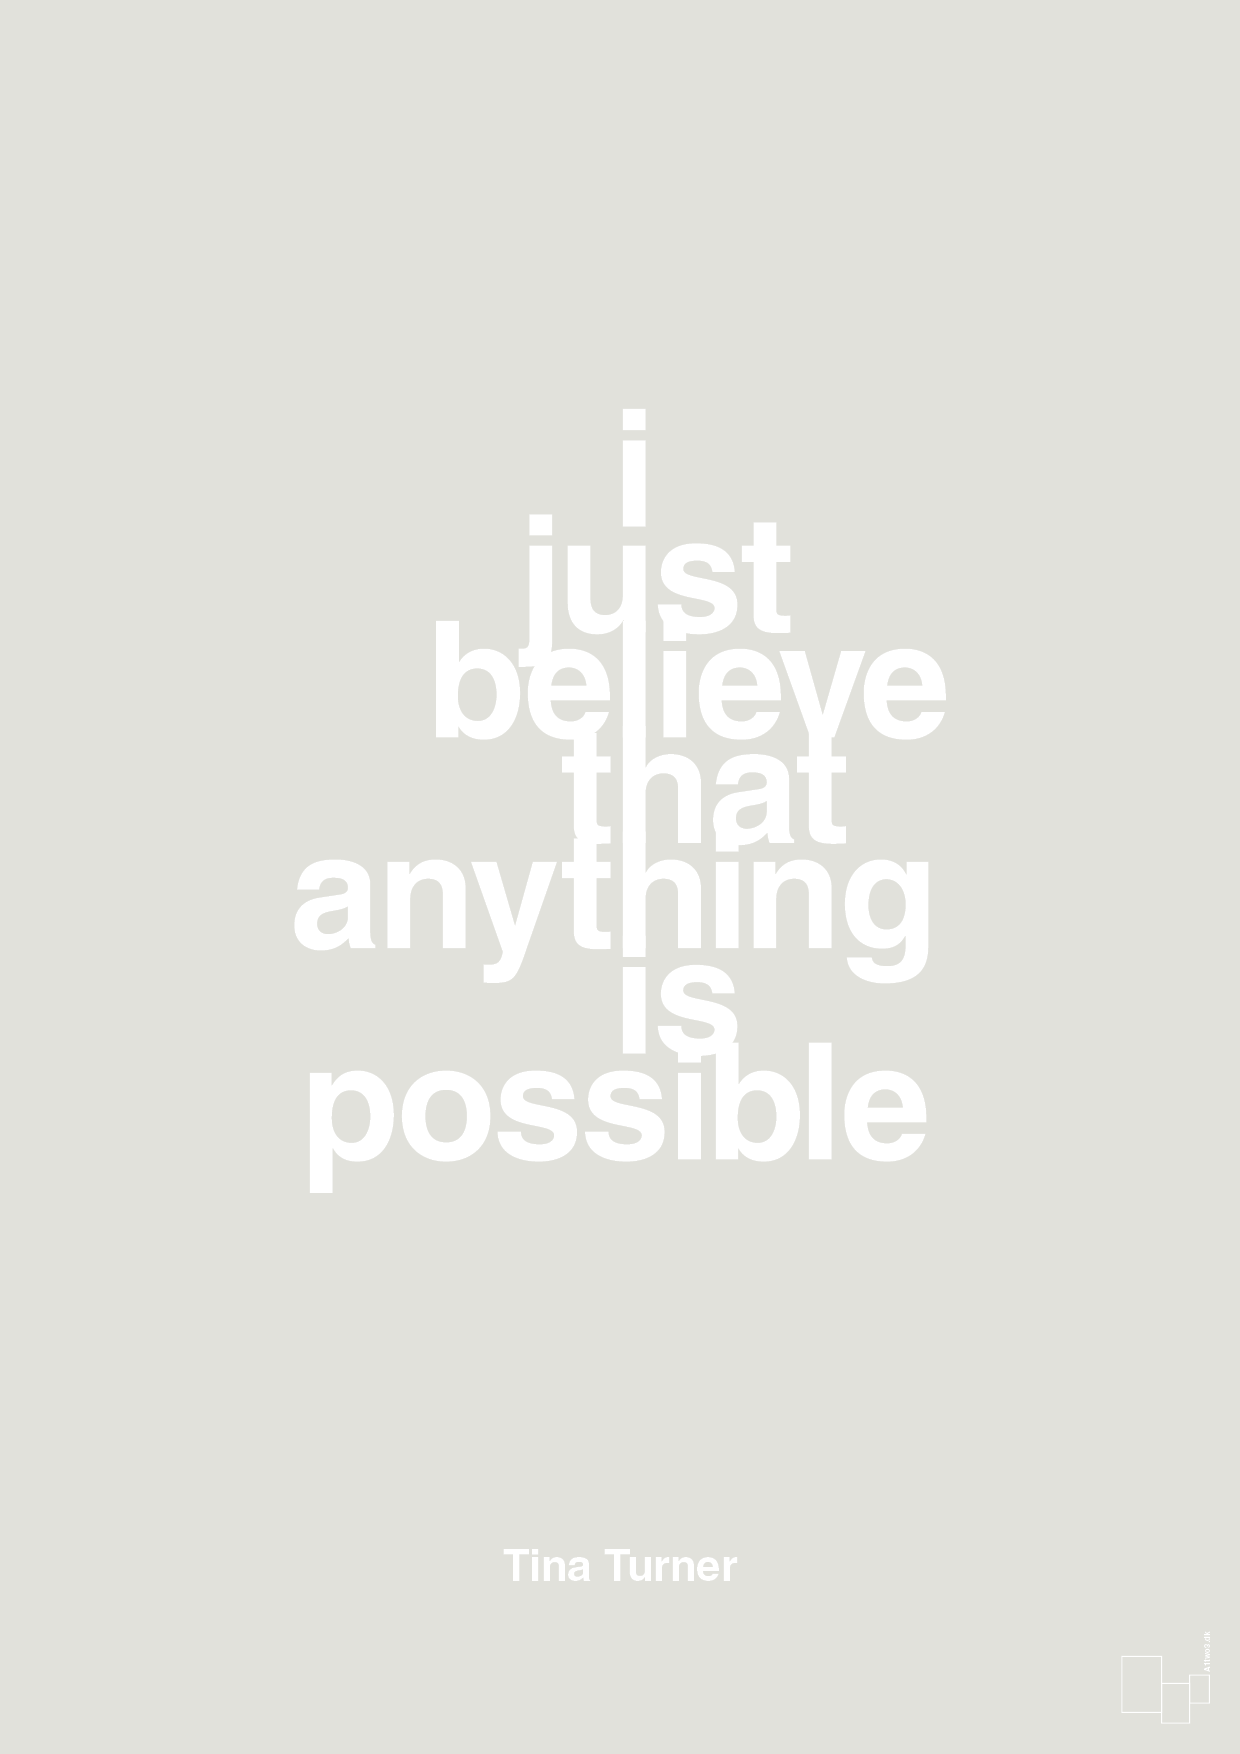 i just believe that anything is possible - Plakat med Citater i Painters White